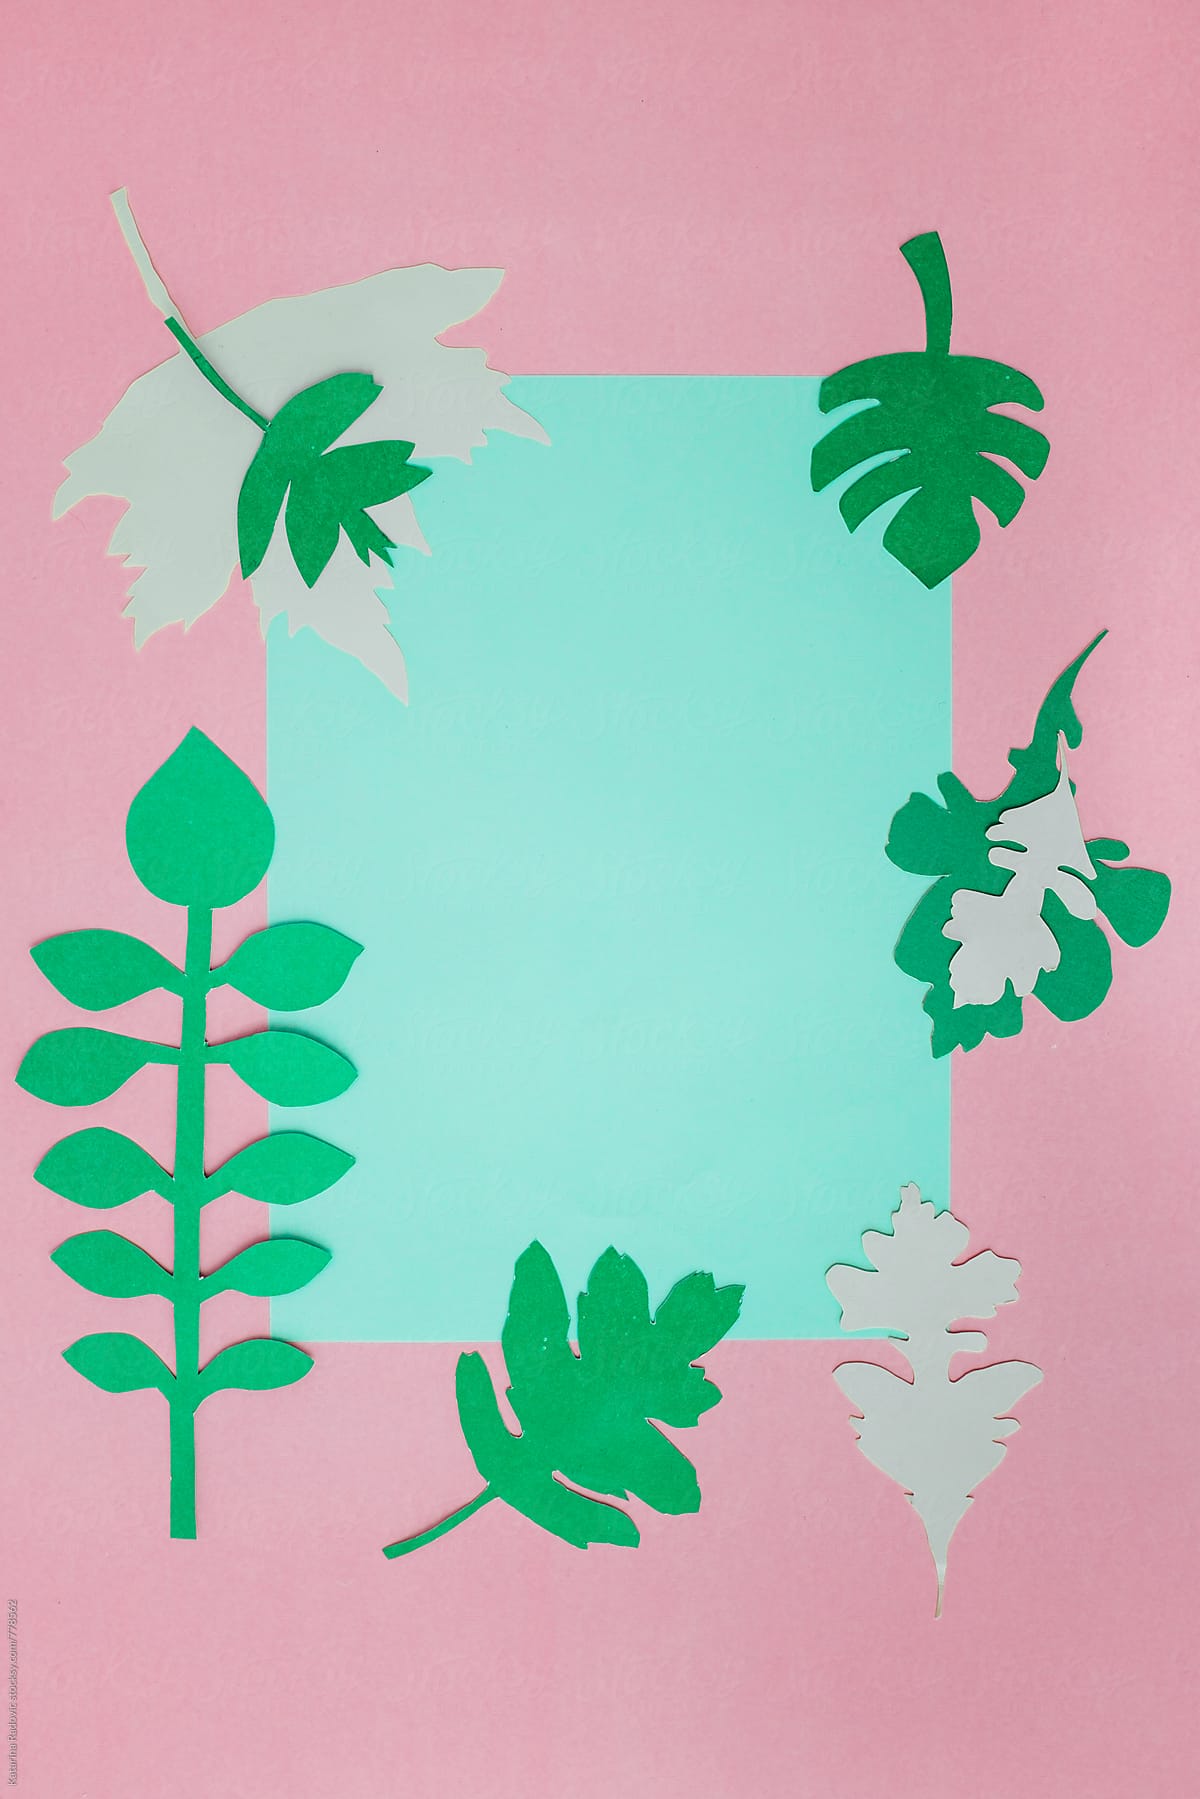 Paper Leaves Arranged with a Pink Pastel Background